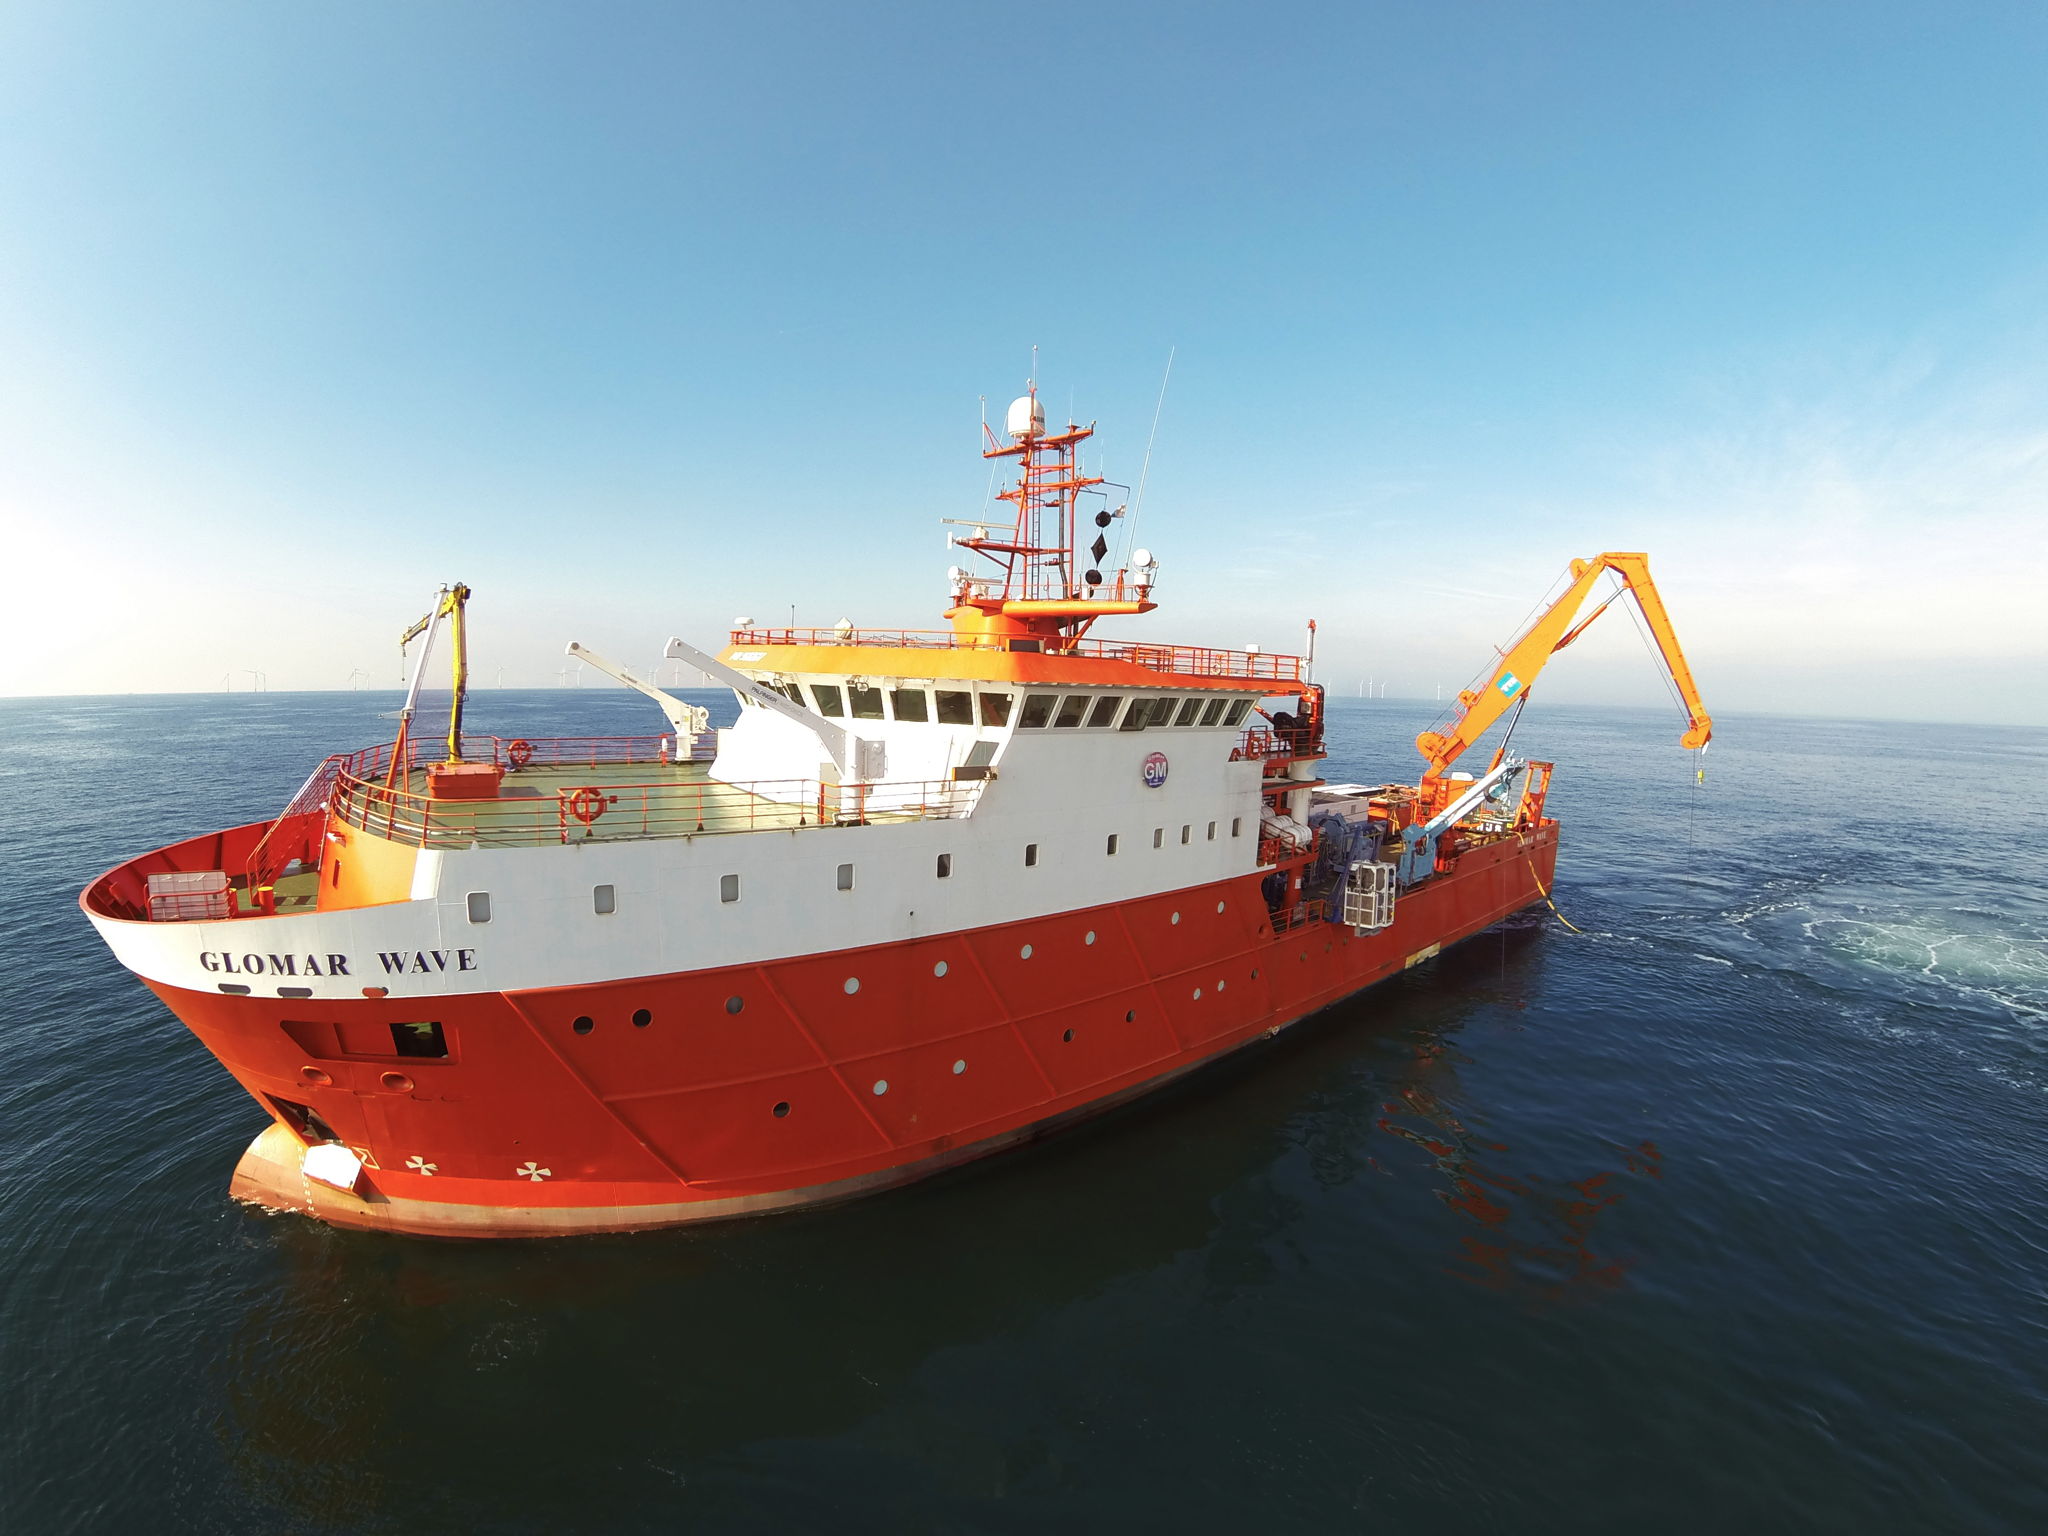 The Glomar Wave vessel at sea, to be used at Beatrice offshore wind farm